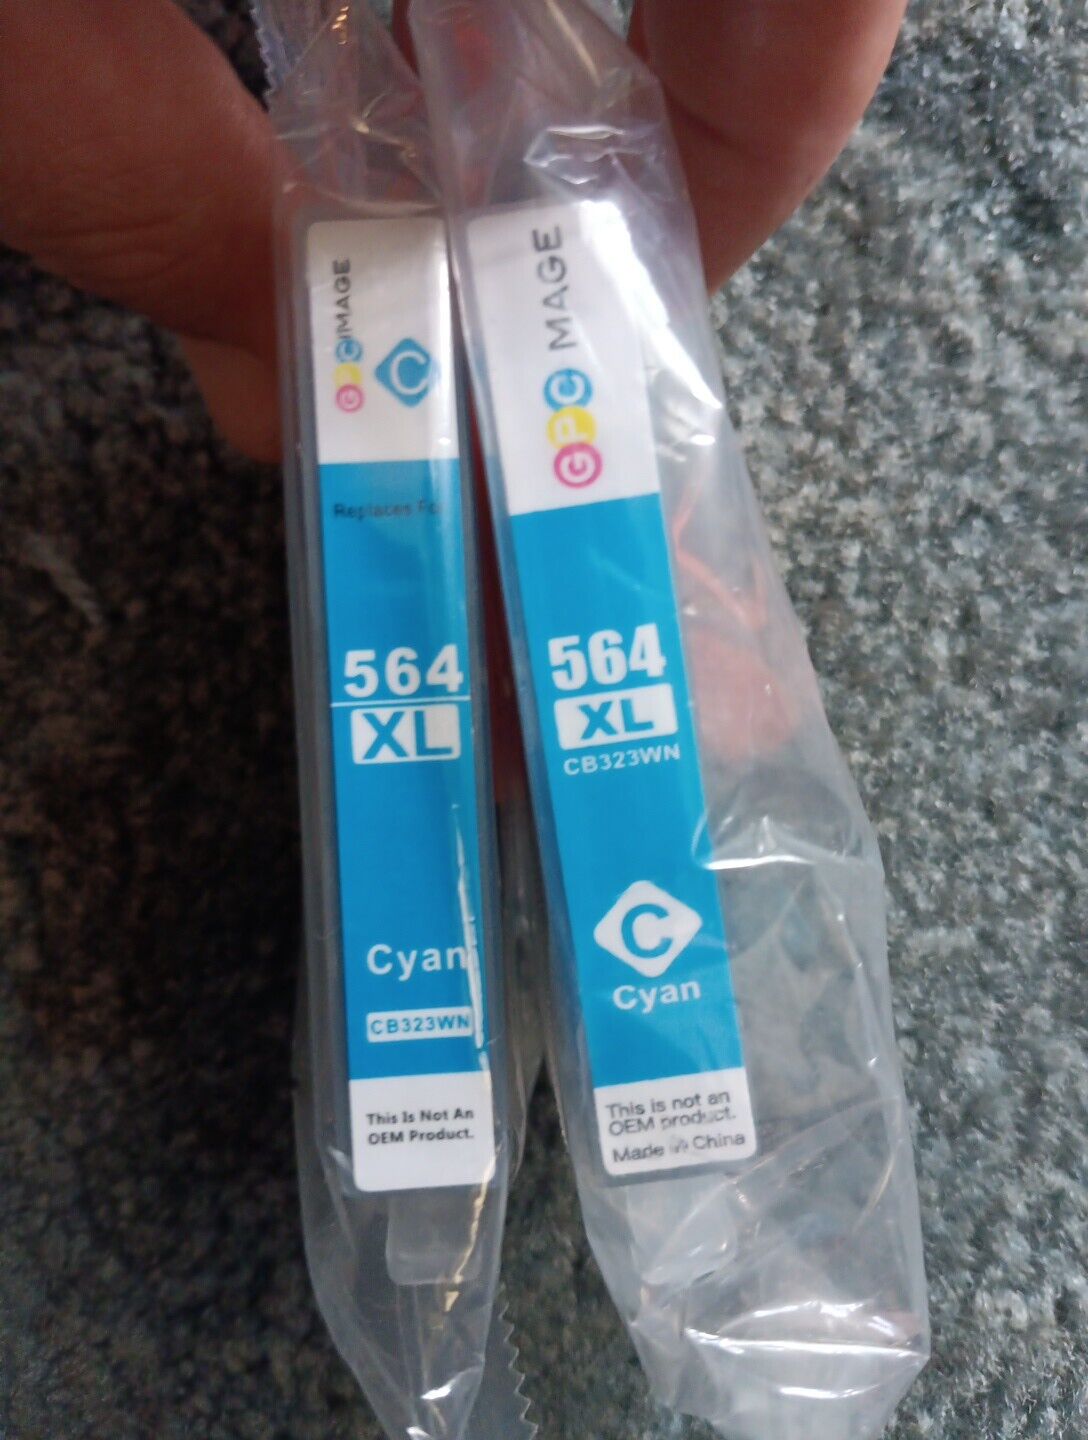 GPC Image 564XL Cyan Ink Cartridges Lot of 2 Sealed New in Package